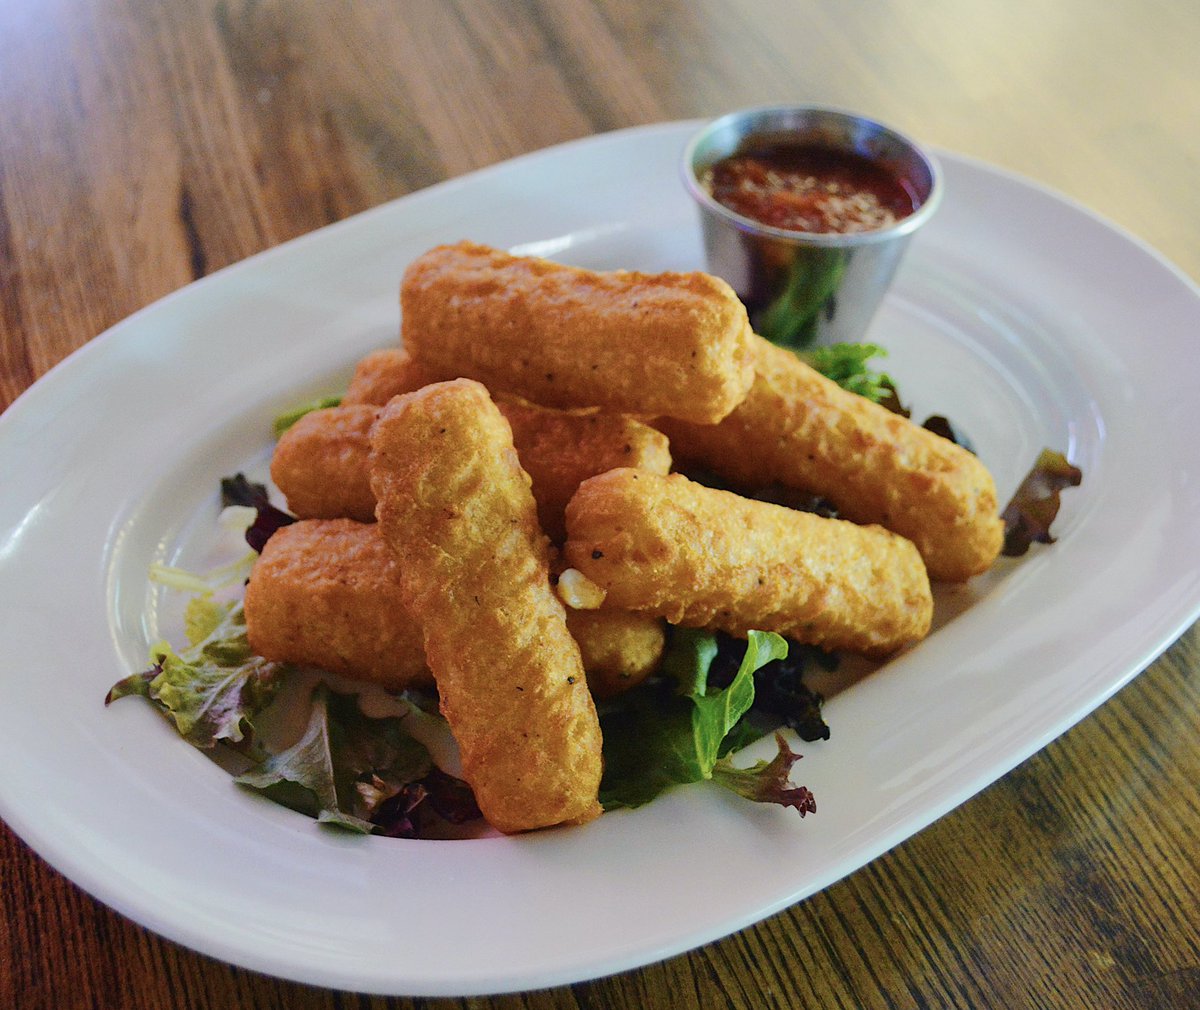 NEW MENU ITEM ALERT 🚨 

With all of our amazing week day specials and events, our new mozzarella sticks are the PERFECT starter to any entree order. 👌 

#202socialhouse #mozzarellasticks #goodfoodmood